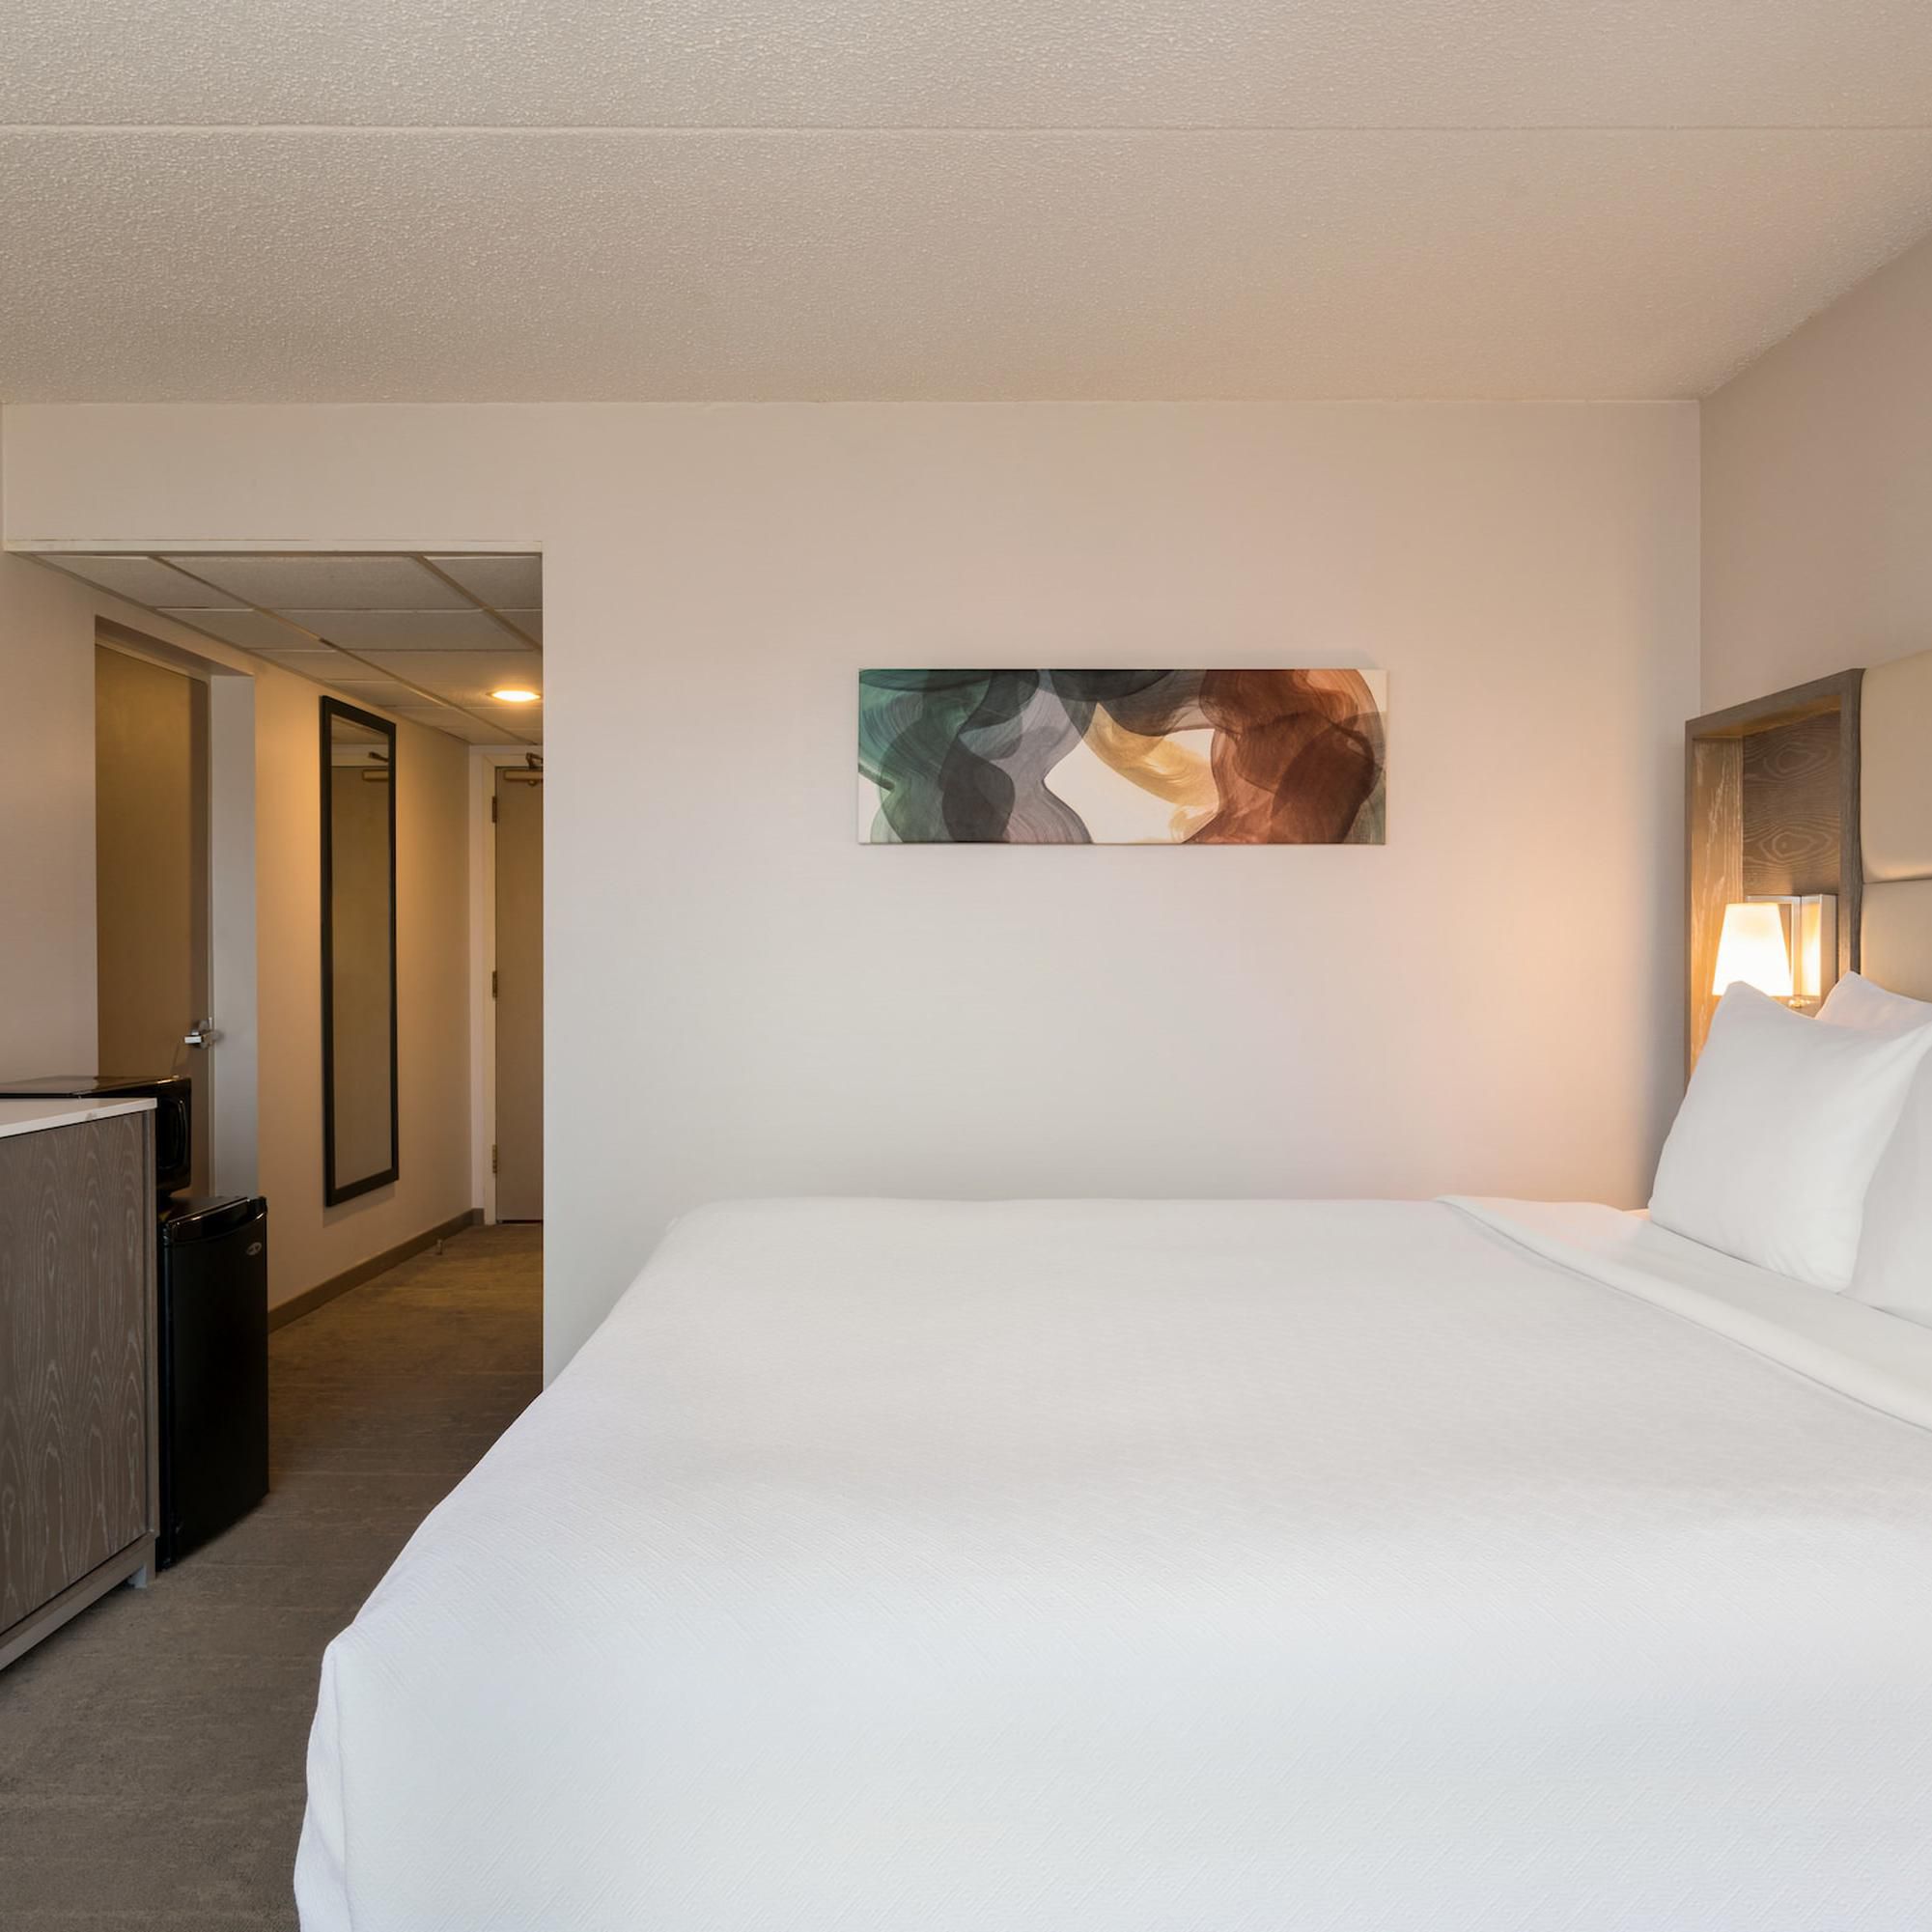 Rooms feature free Wi-Fi, comfortable bedding and modern decor.